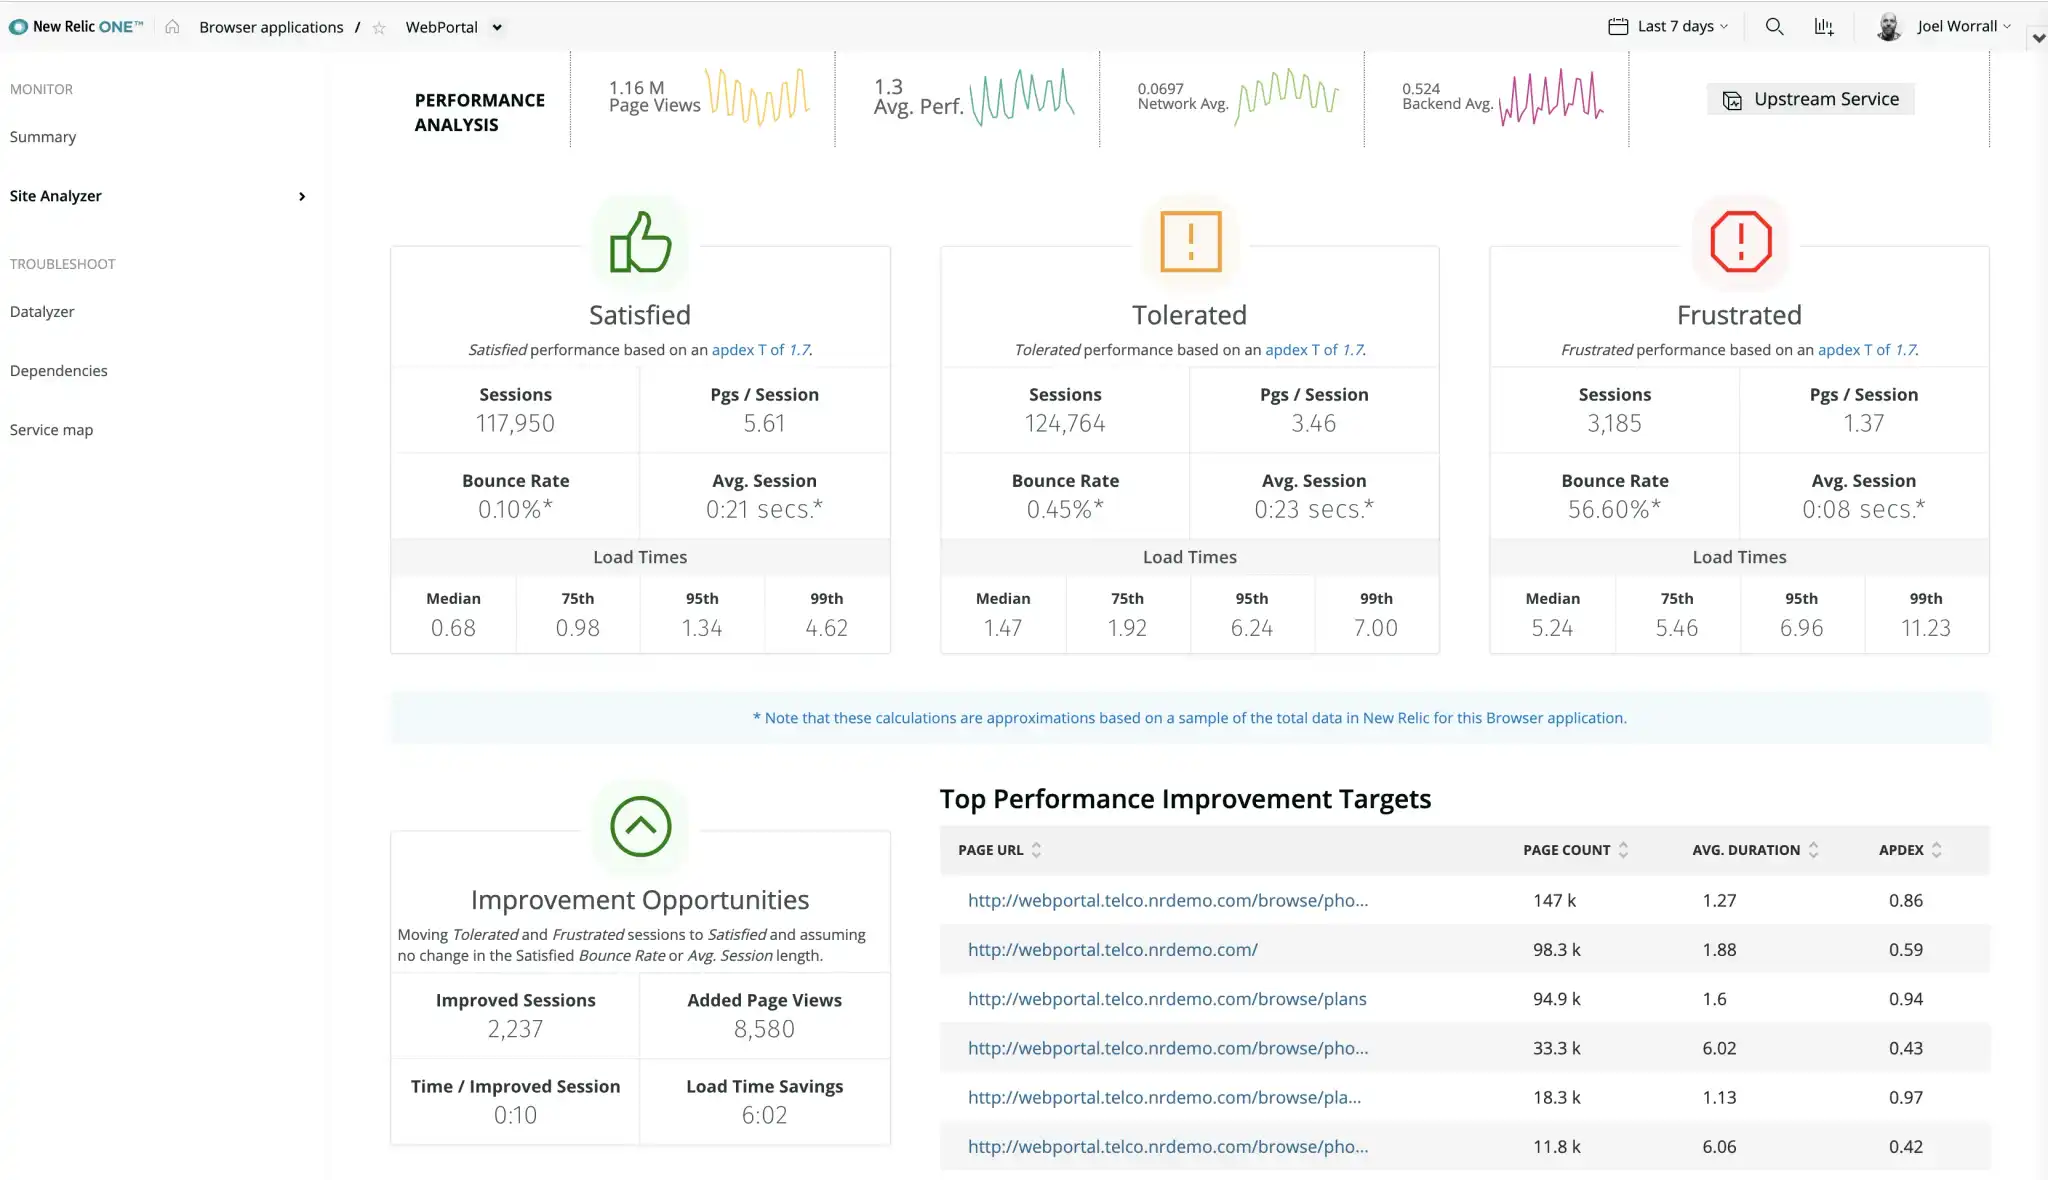 The essence of Application Performance Monitoring (APM) - metrics, insights, and benefits | New Relic One